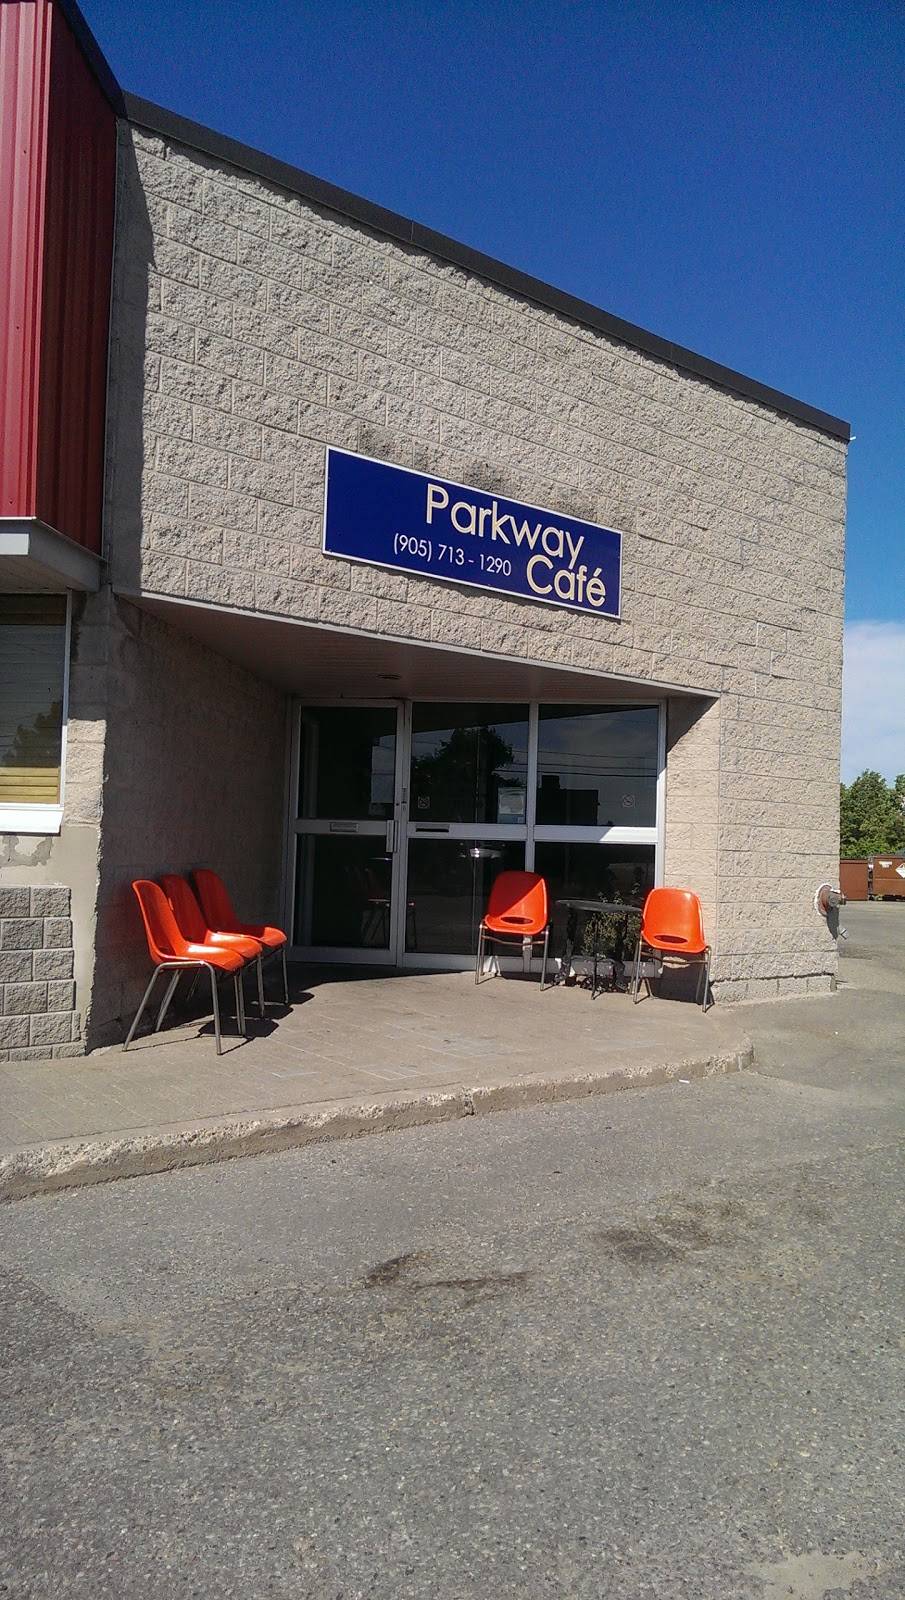 Parkway Cafe | restaurant | 225 Industrial Pkwy S, Aurora, ON L4G 3V5, Canada | 9057131290 OR +1 905-713-1290